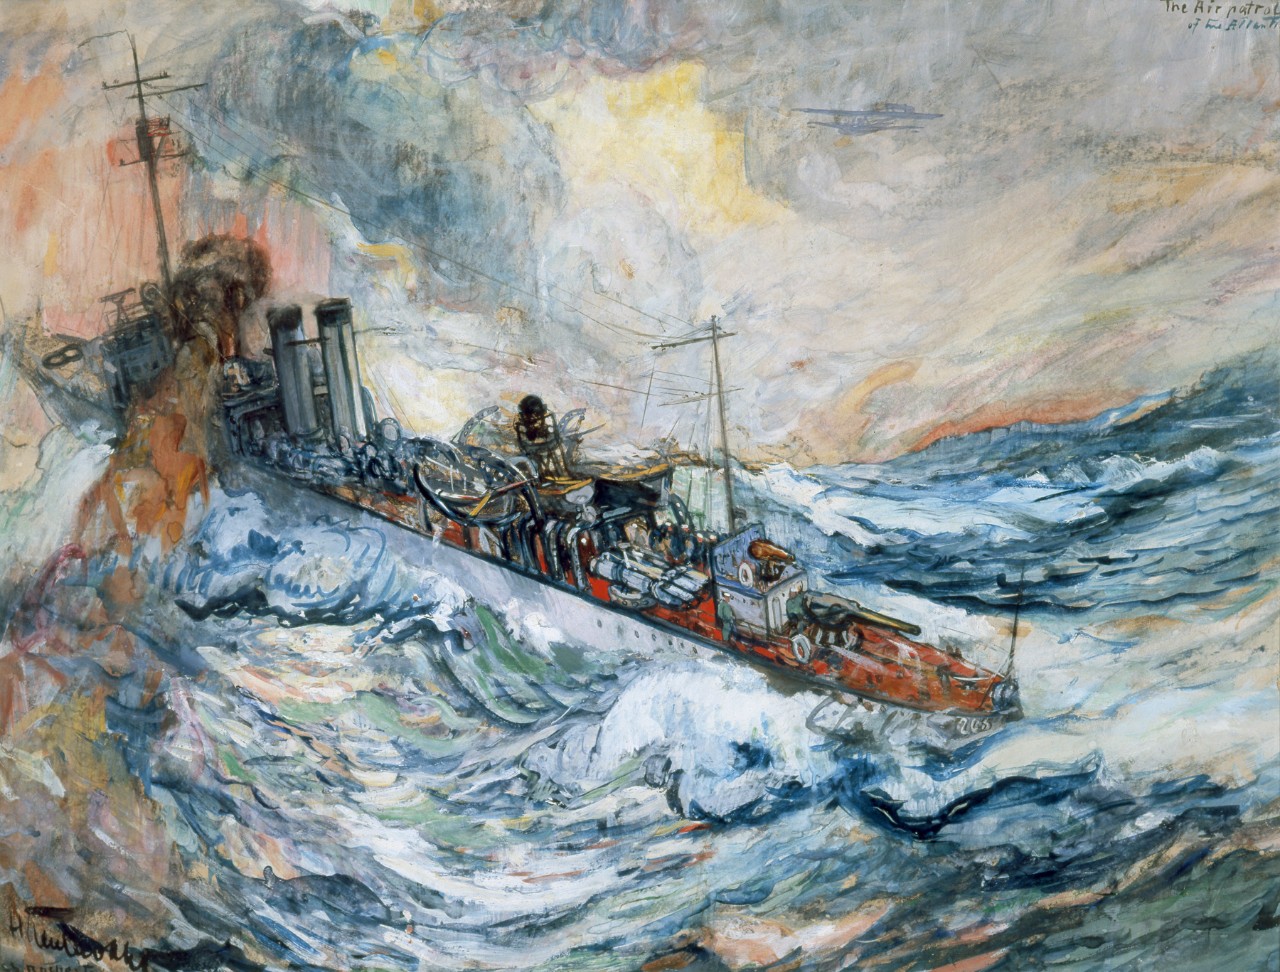 A ship with smoke pouring from its smoke stacks in very rough seas